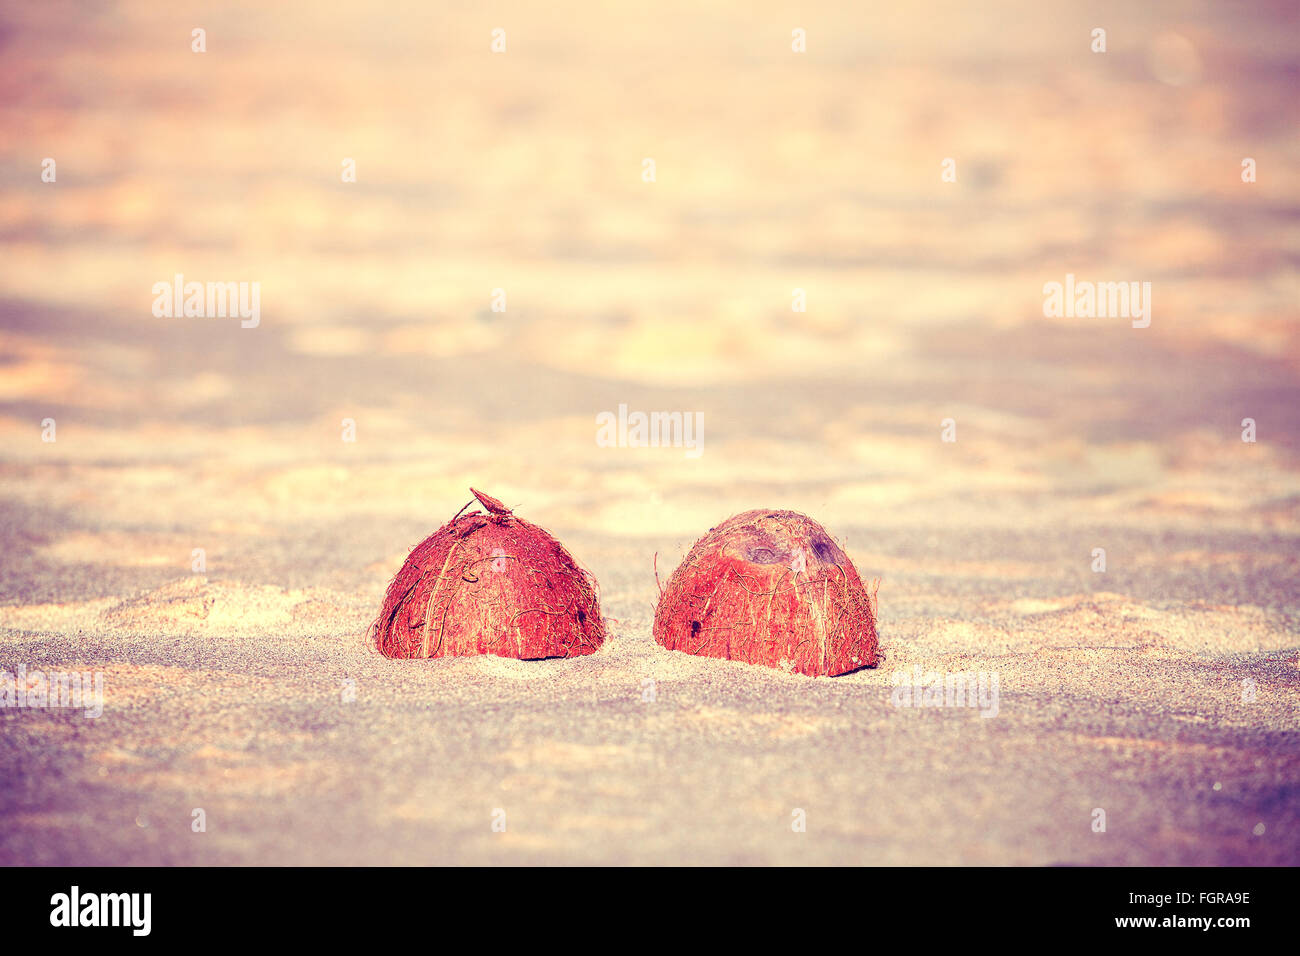 Vintage toned coconut halves on a beach, shallow depth of field. Stock Photo